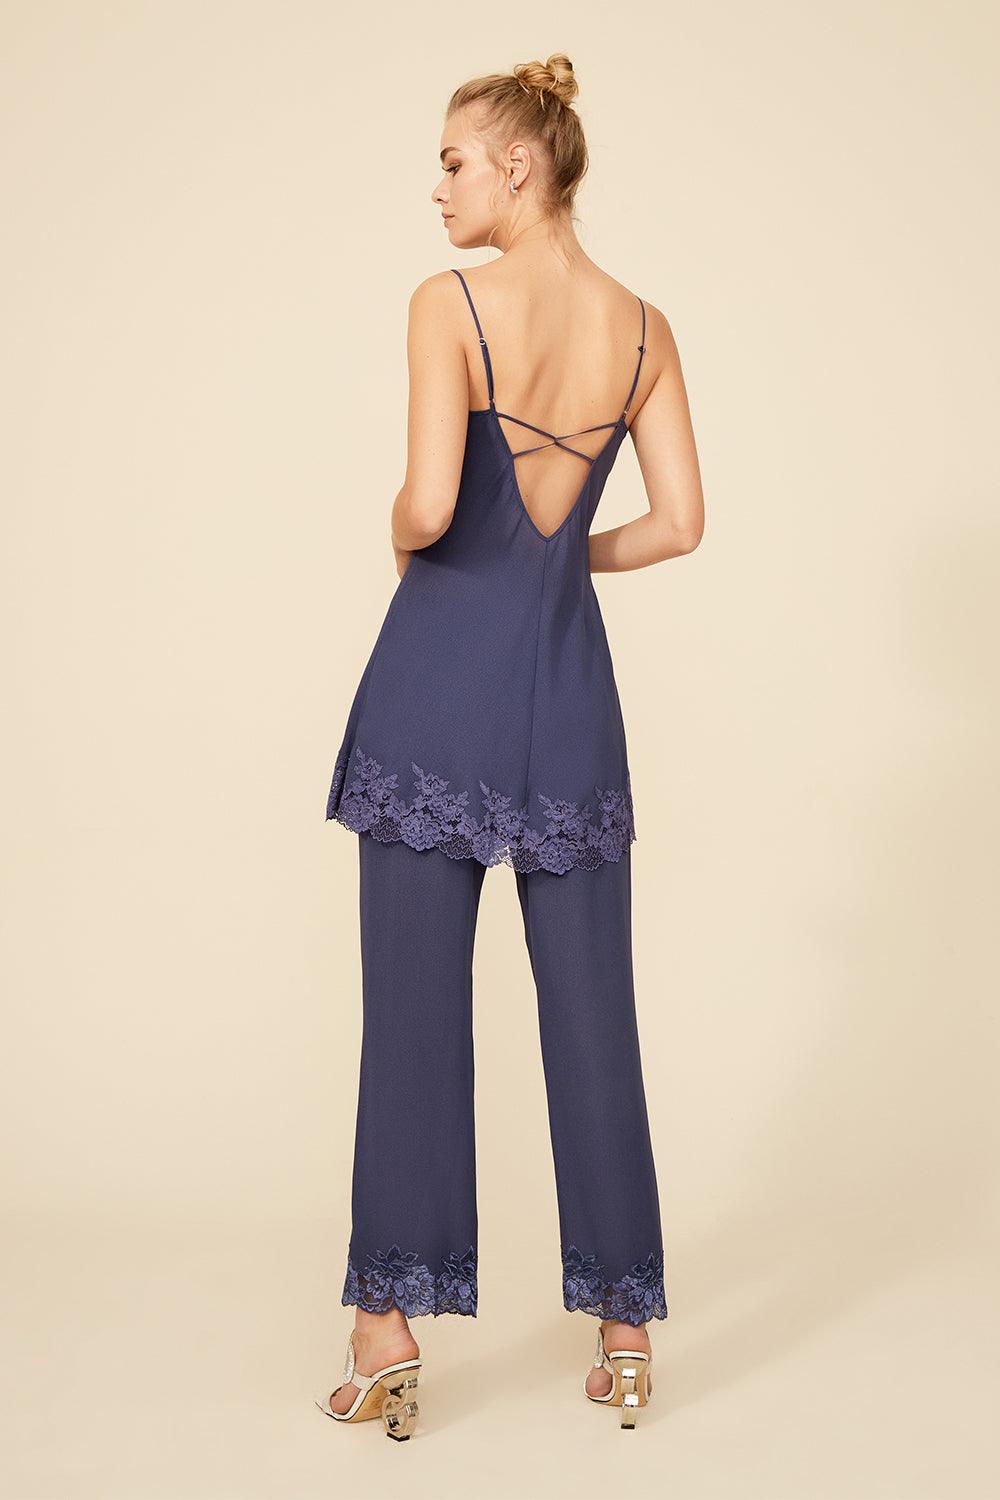 Alleen - Silk Crepe Camisole and Pant PJ Set -  Navy - Bocan